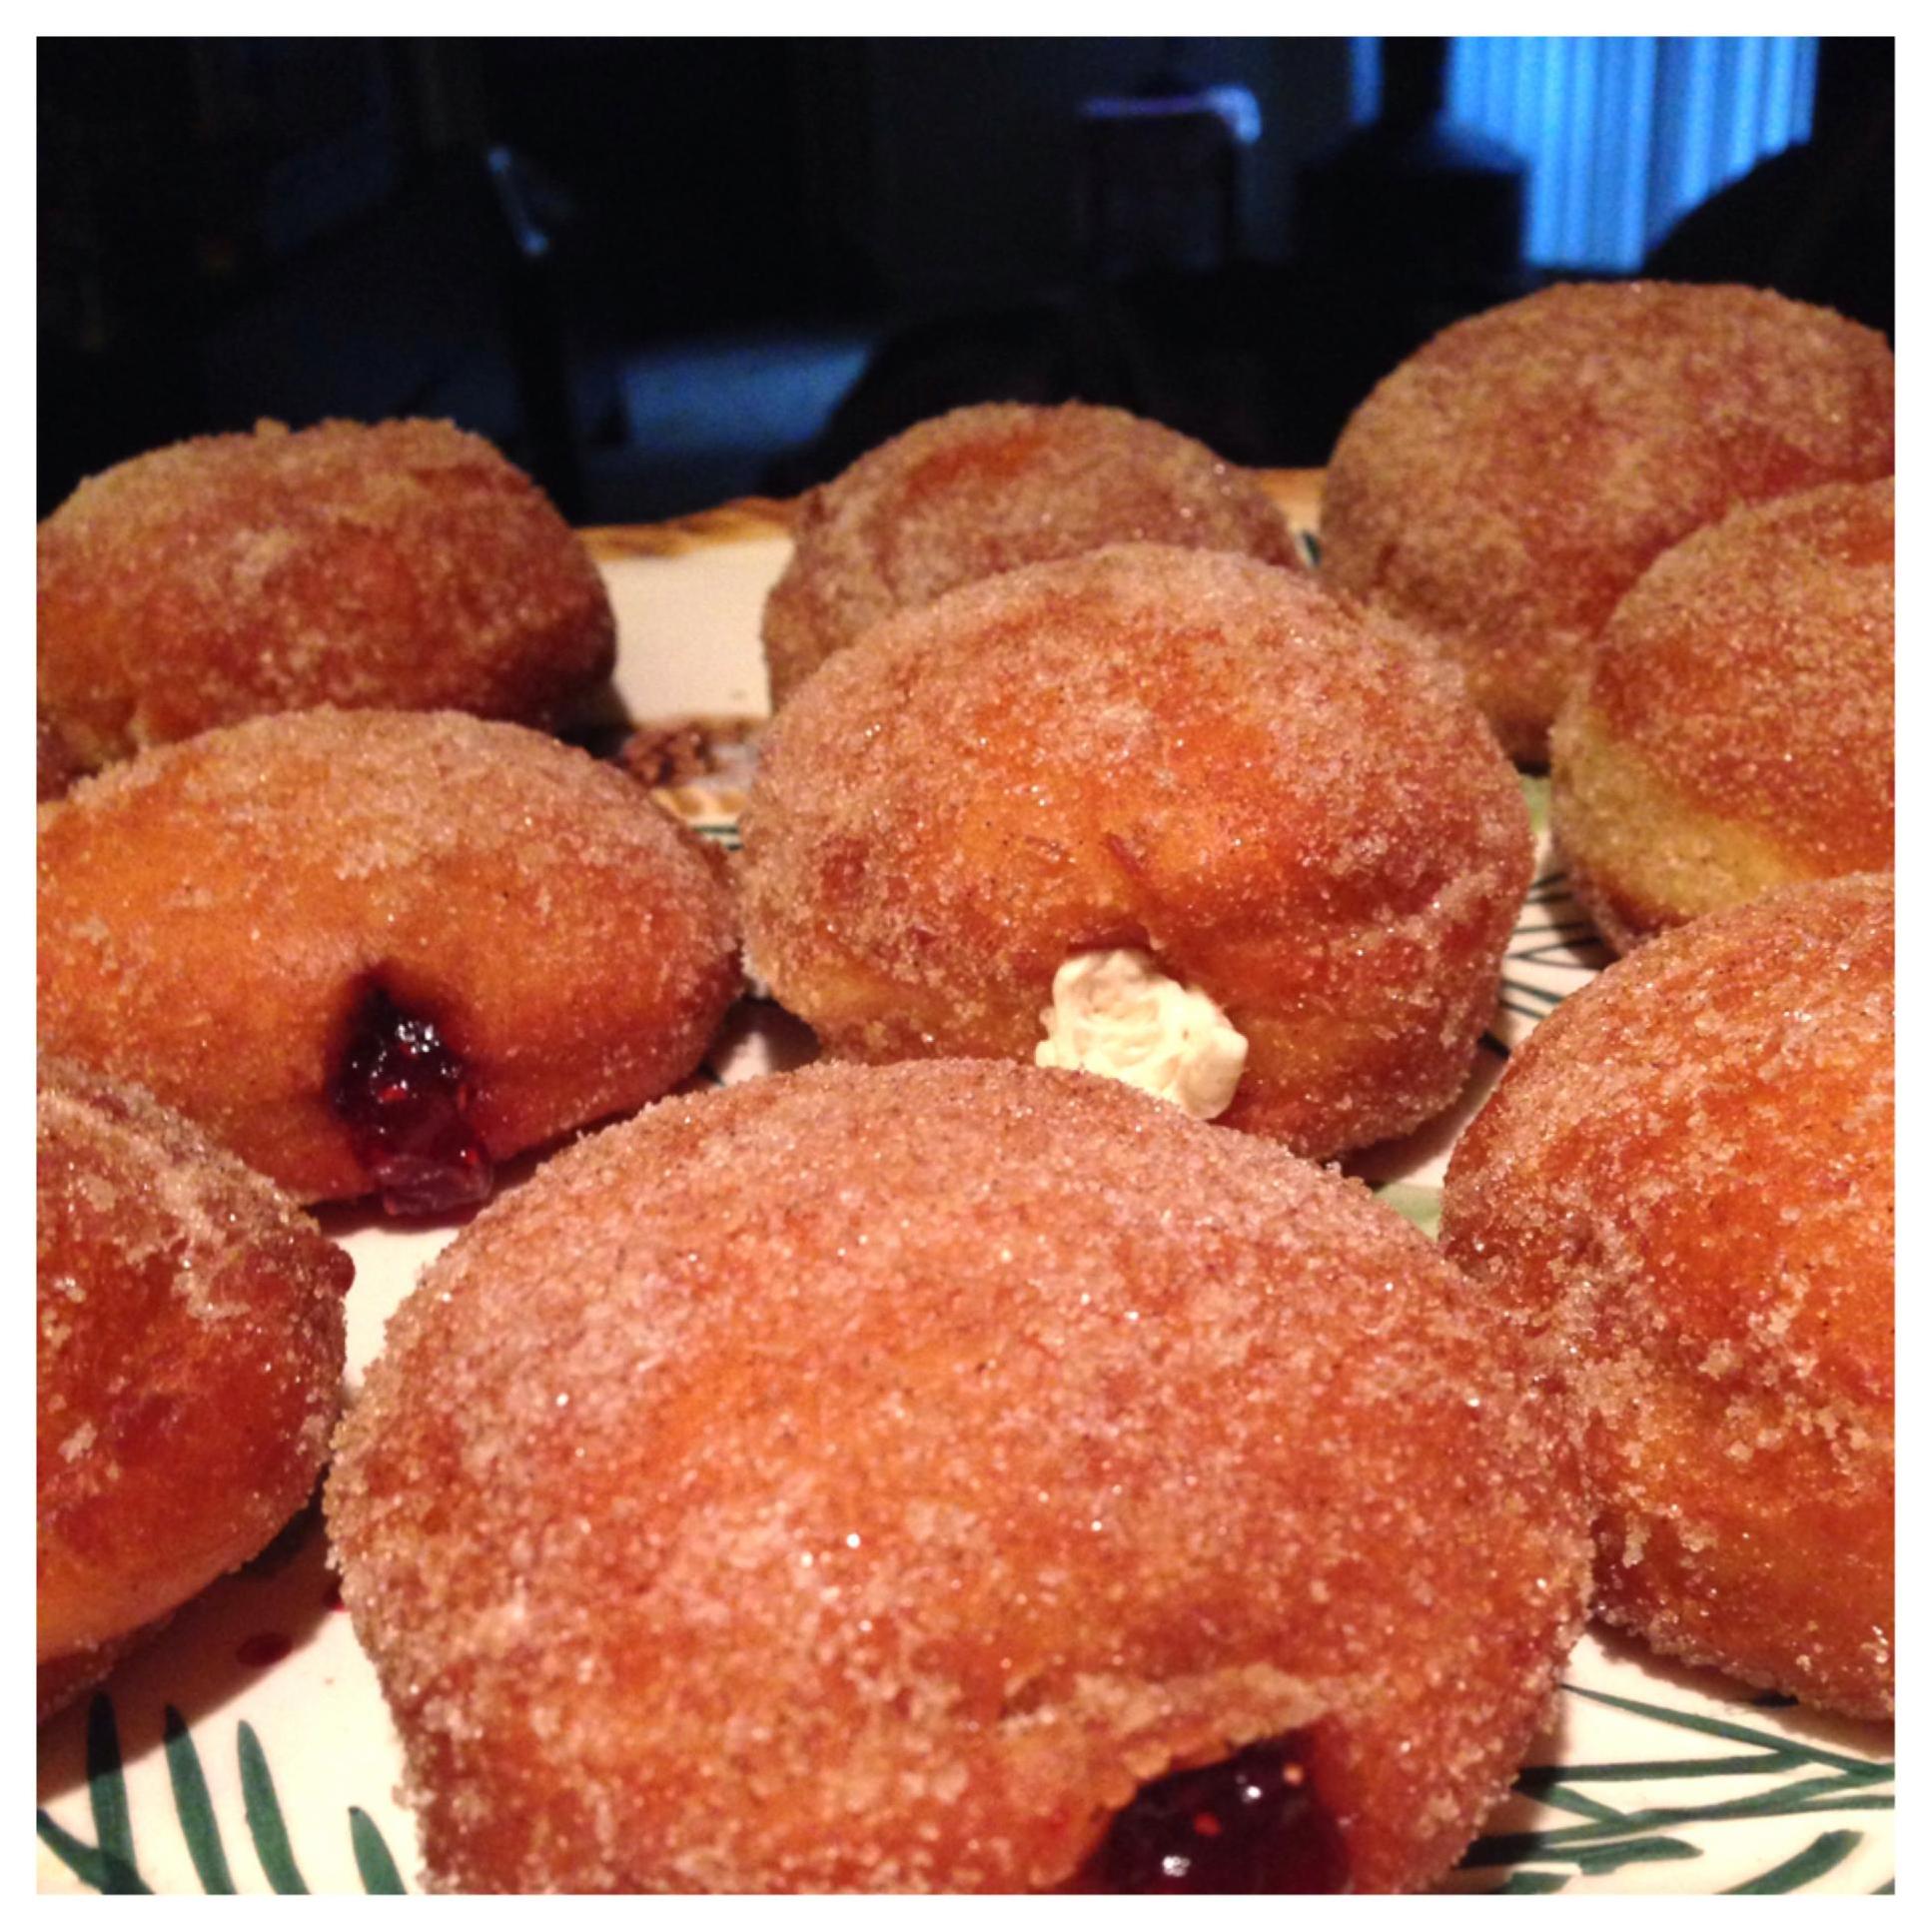  Don't miss out on the holiday fun! Make sure to have plenty of these mouthwatering sufganiyot on hand.